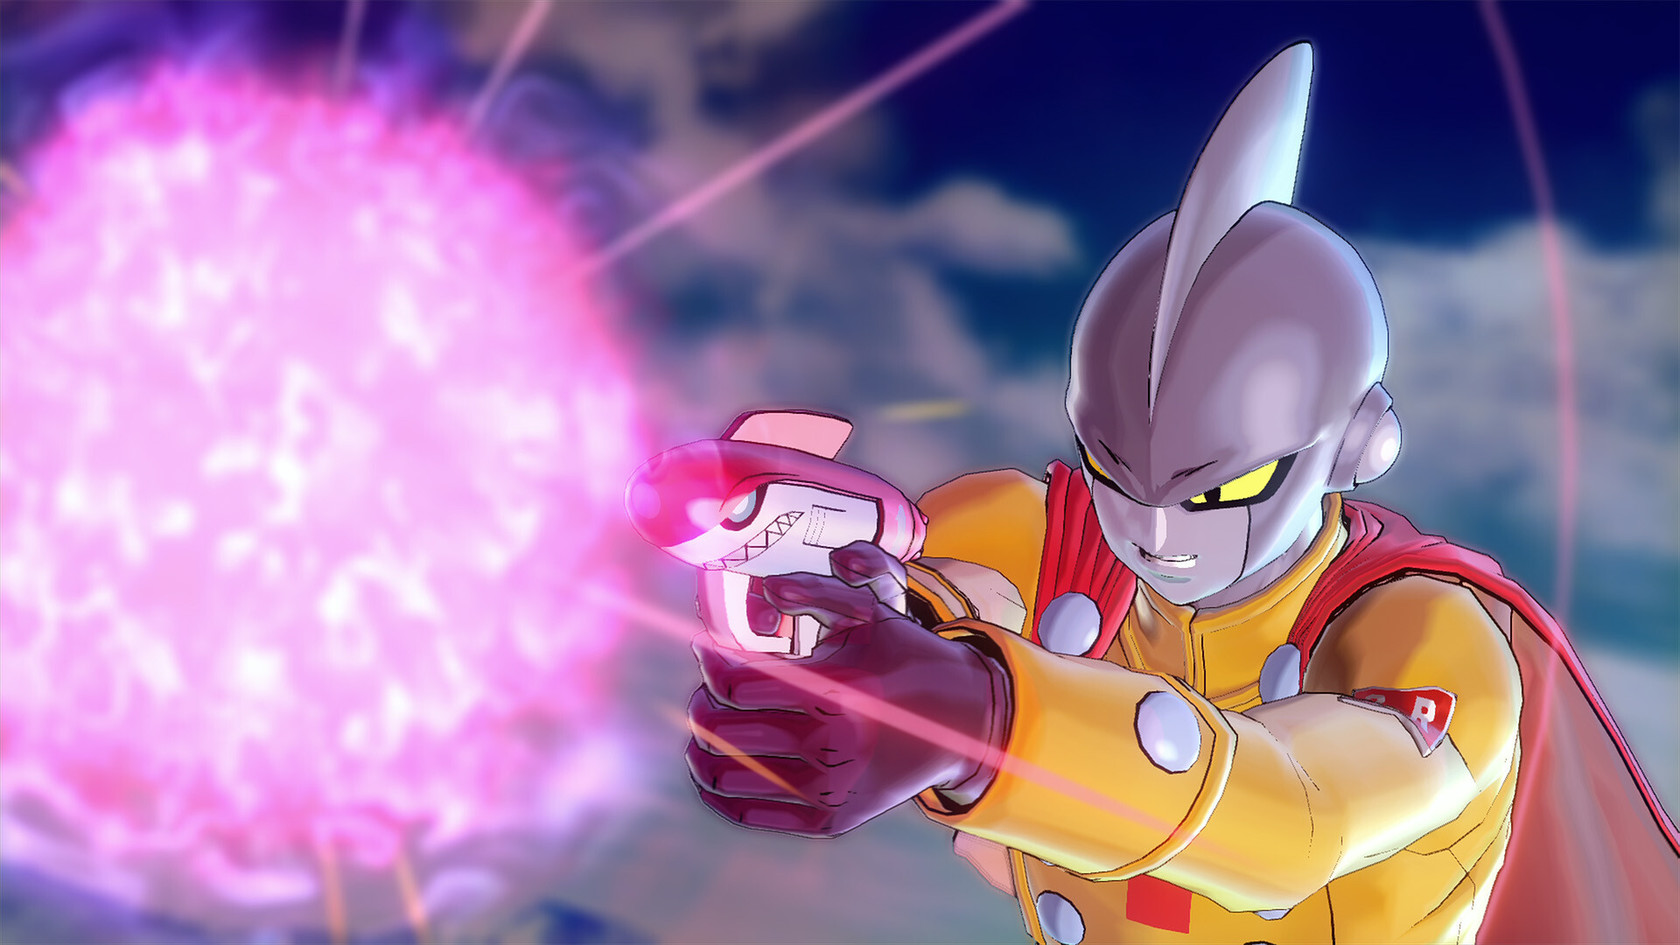 Hero of Justice Pack 2 Released for Dragon Ball Xenoverse 2